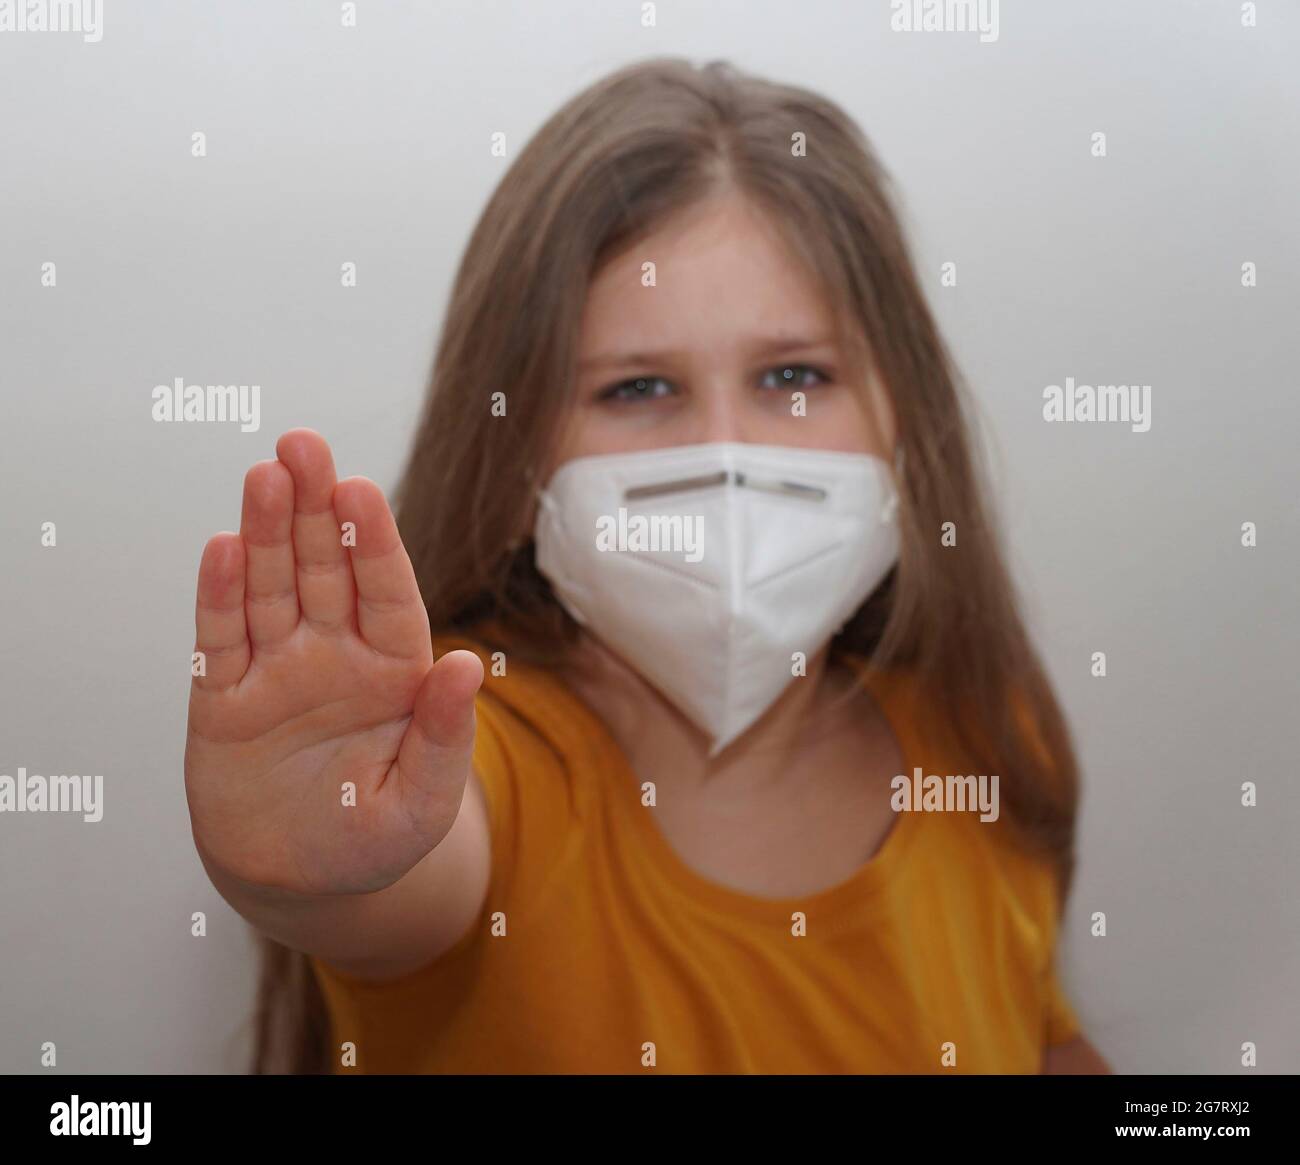 Influenza virus stop gesture. Girl in face mask show deny sign. Focus on a Hand only. The concept of preventing the spread of the pandemic. Stop the v Stock Photo